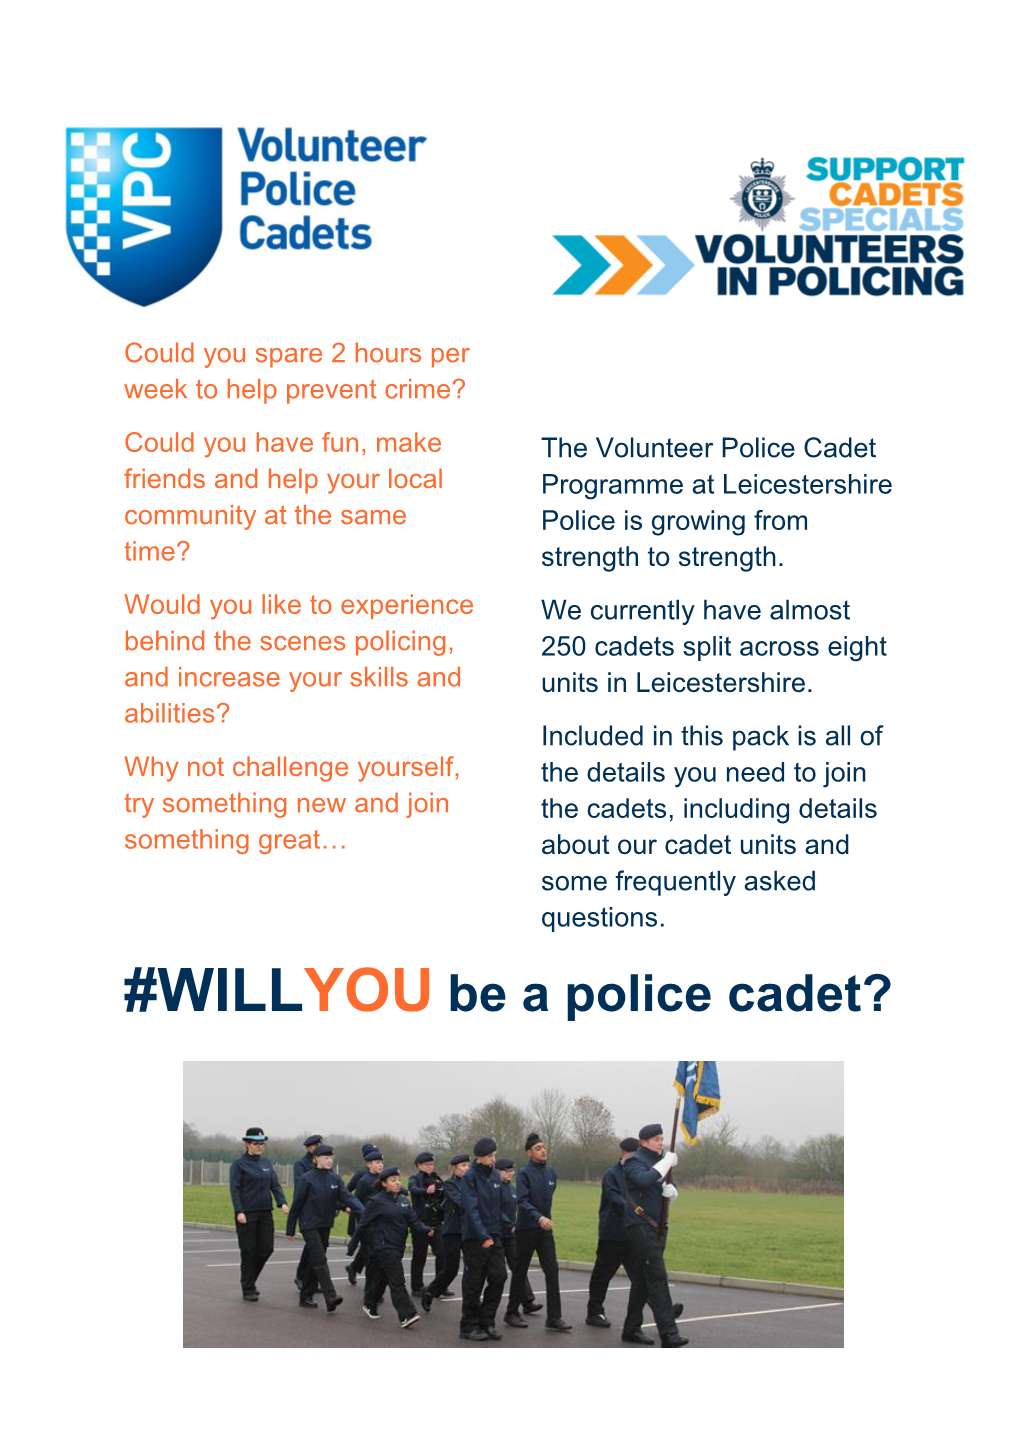 WILLYOU Be a Police Cadet?